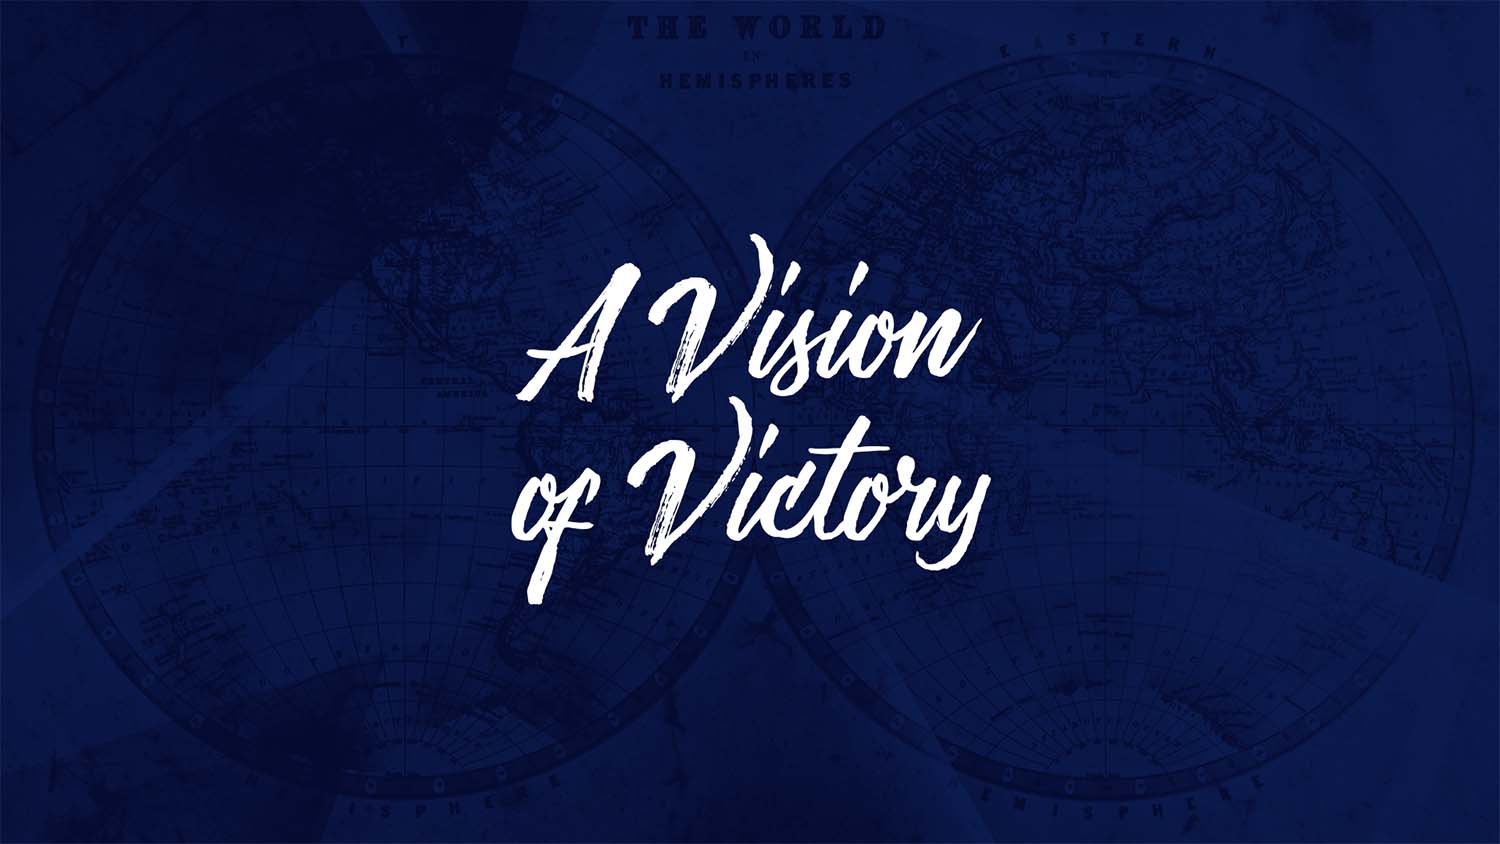 Vision of Victory Image